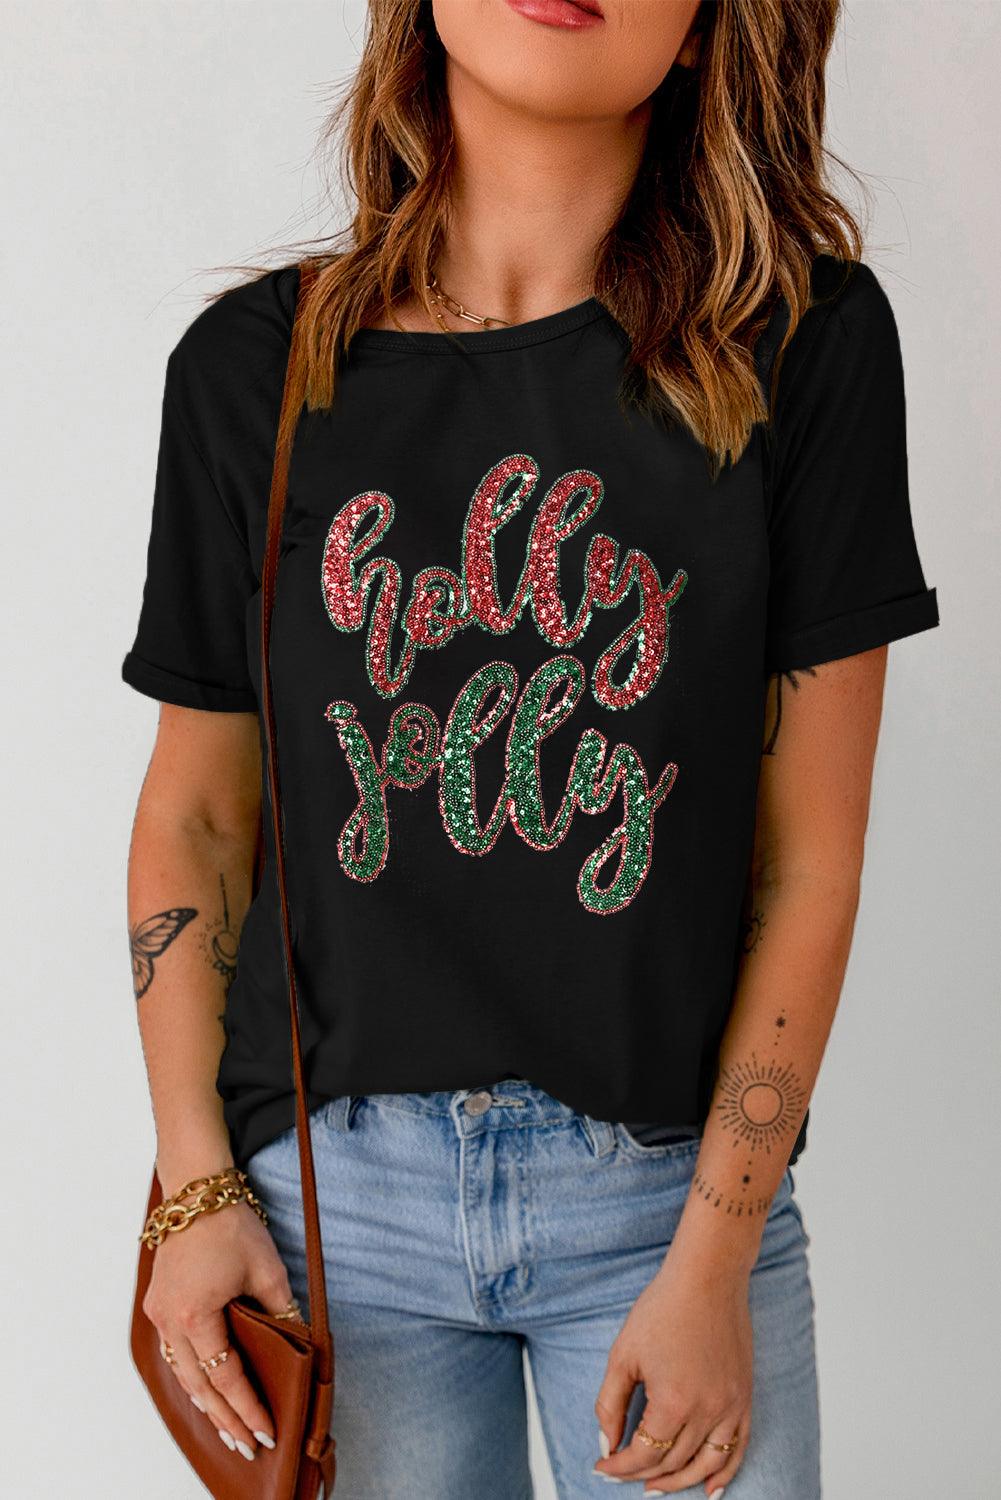 Black Christmas Sequined holly jolly Graphic Tee - L & M Kee, LLC